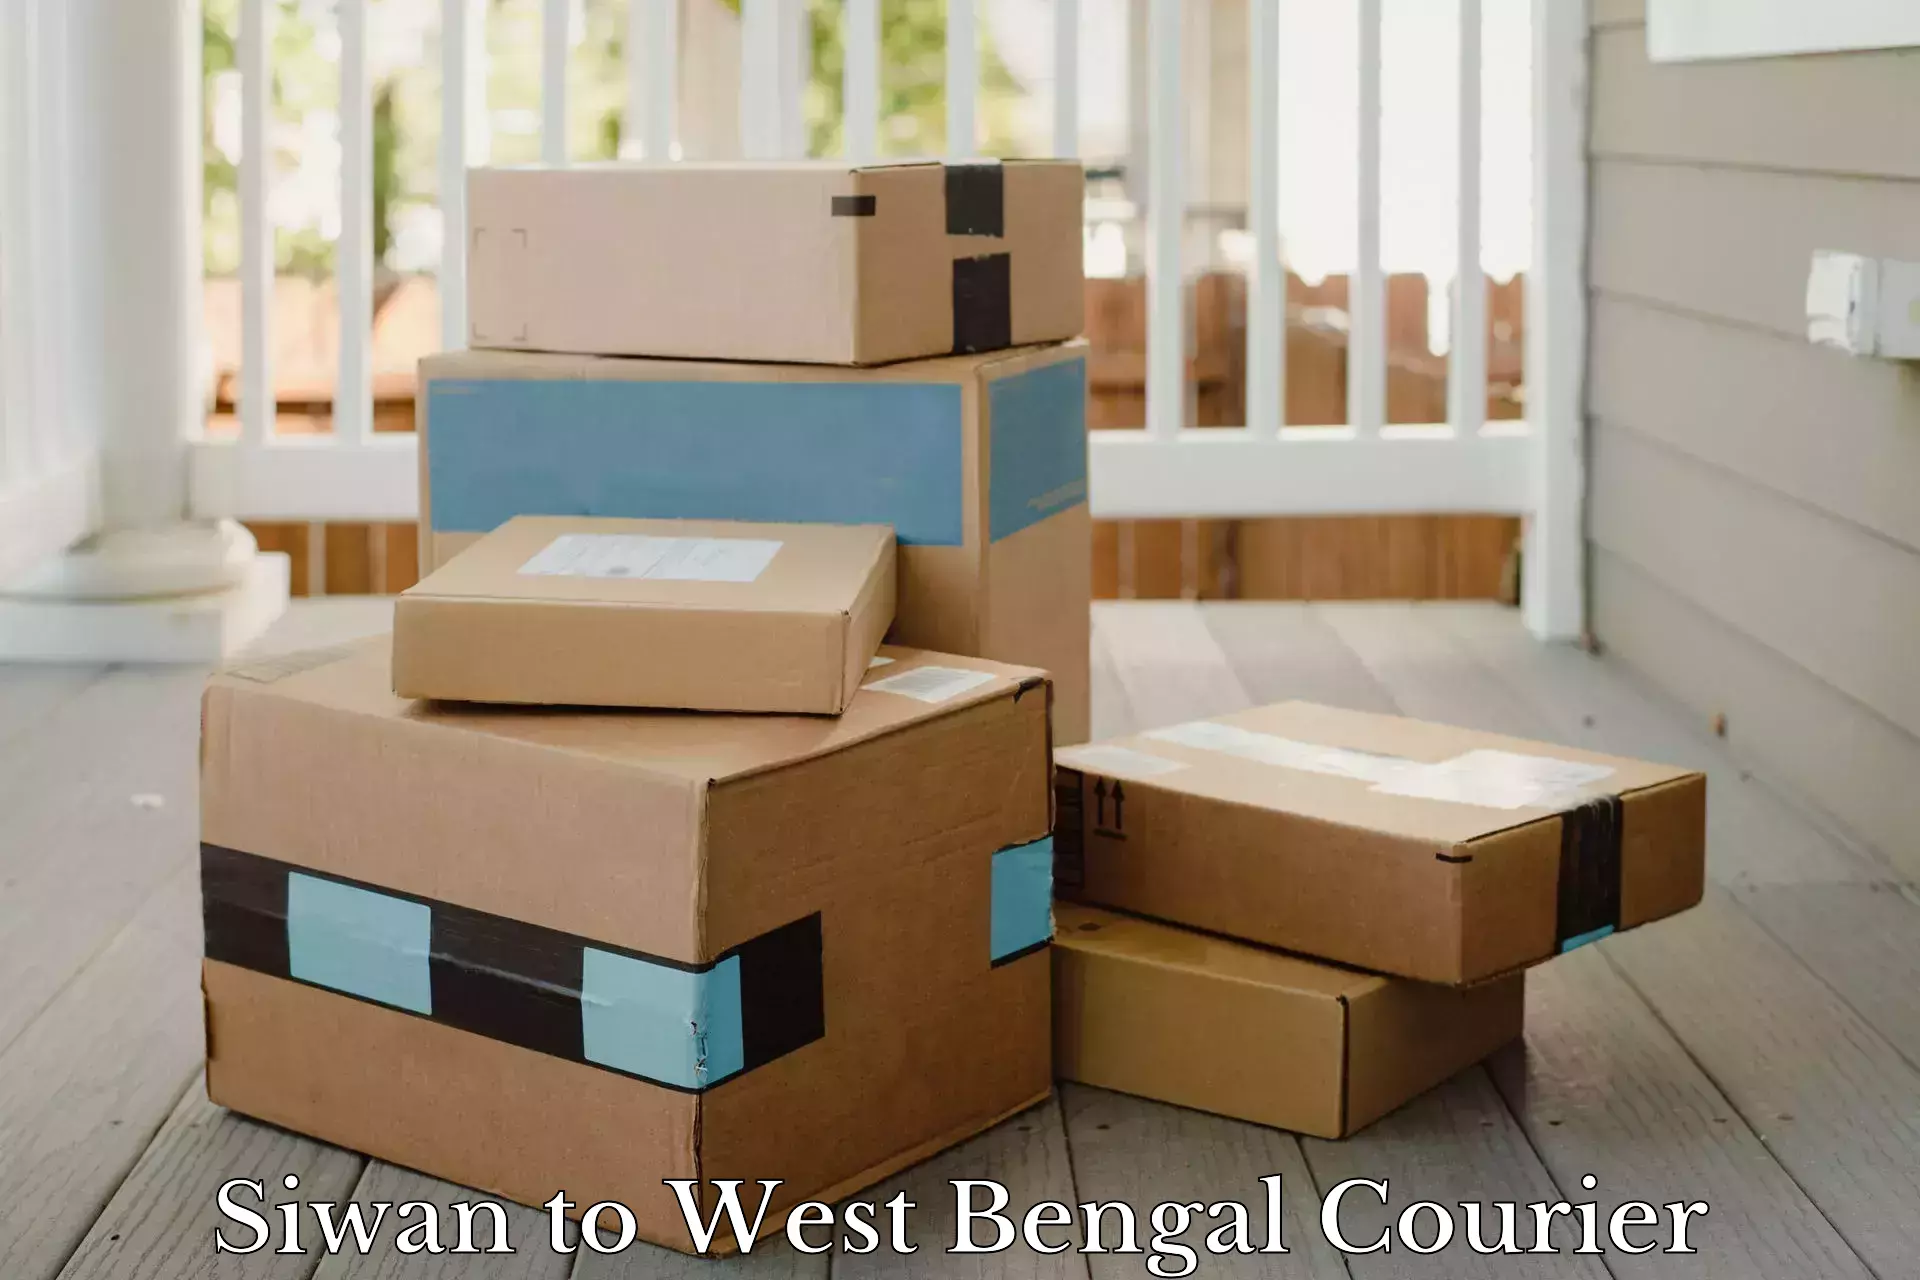 Digital courier platforms Siwan to West Bengal